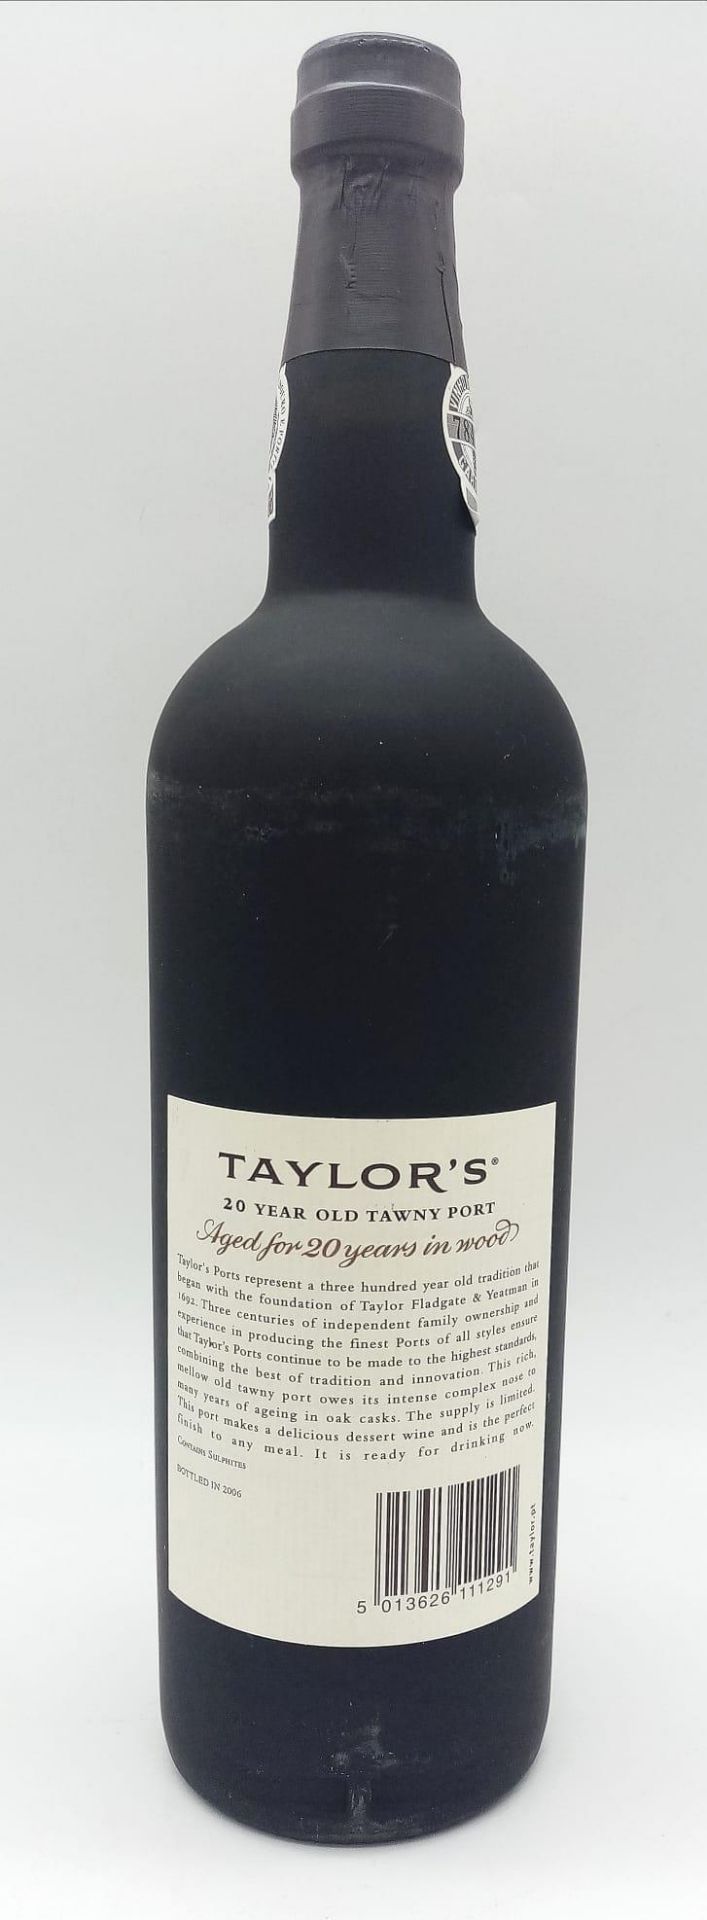 A Scarce Presentation Boxed Bottle of Taylors 20 Year Old Tawny Port. Full Contents, Unopened. - Image 2 of 5